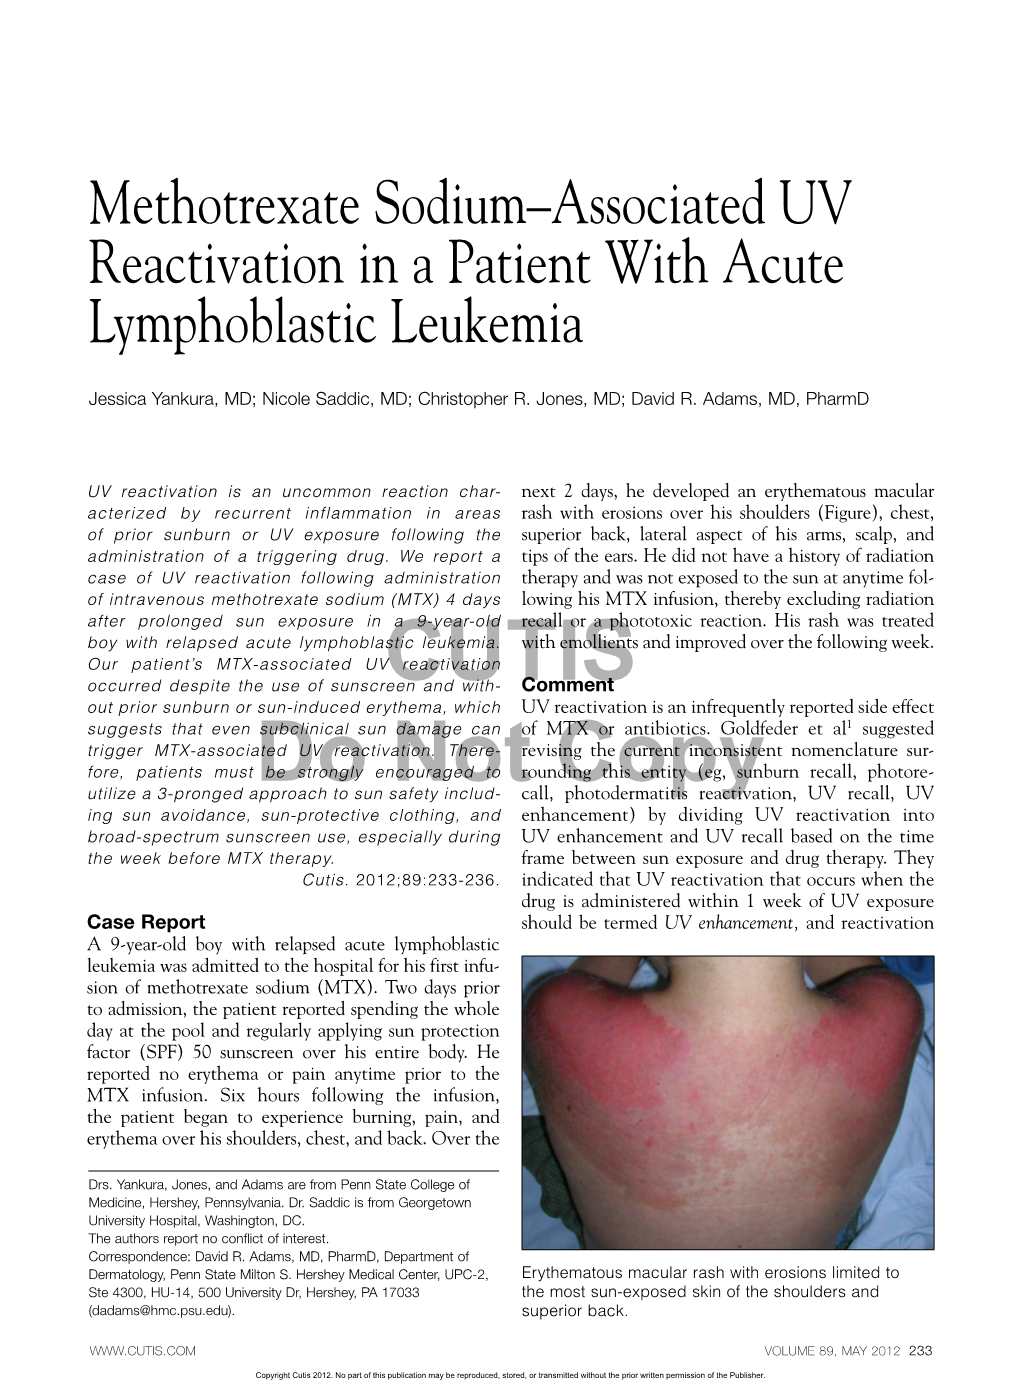 Methotrexate Sodium–Associated UV Reactivation in a Patient with Acute Lymphoblastic Leukemia